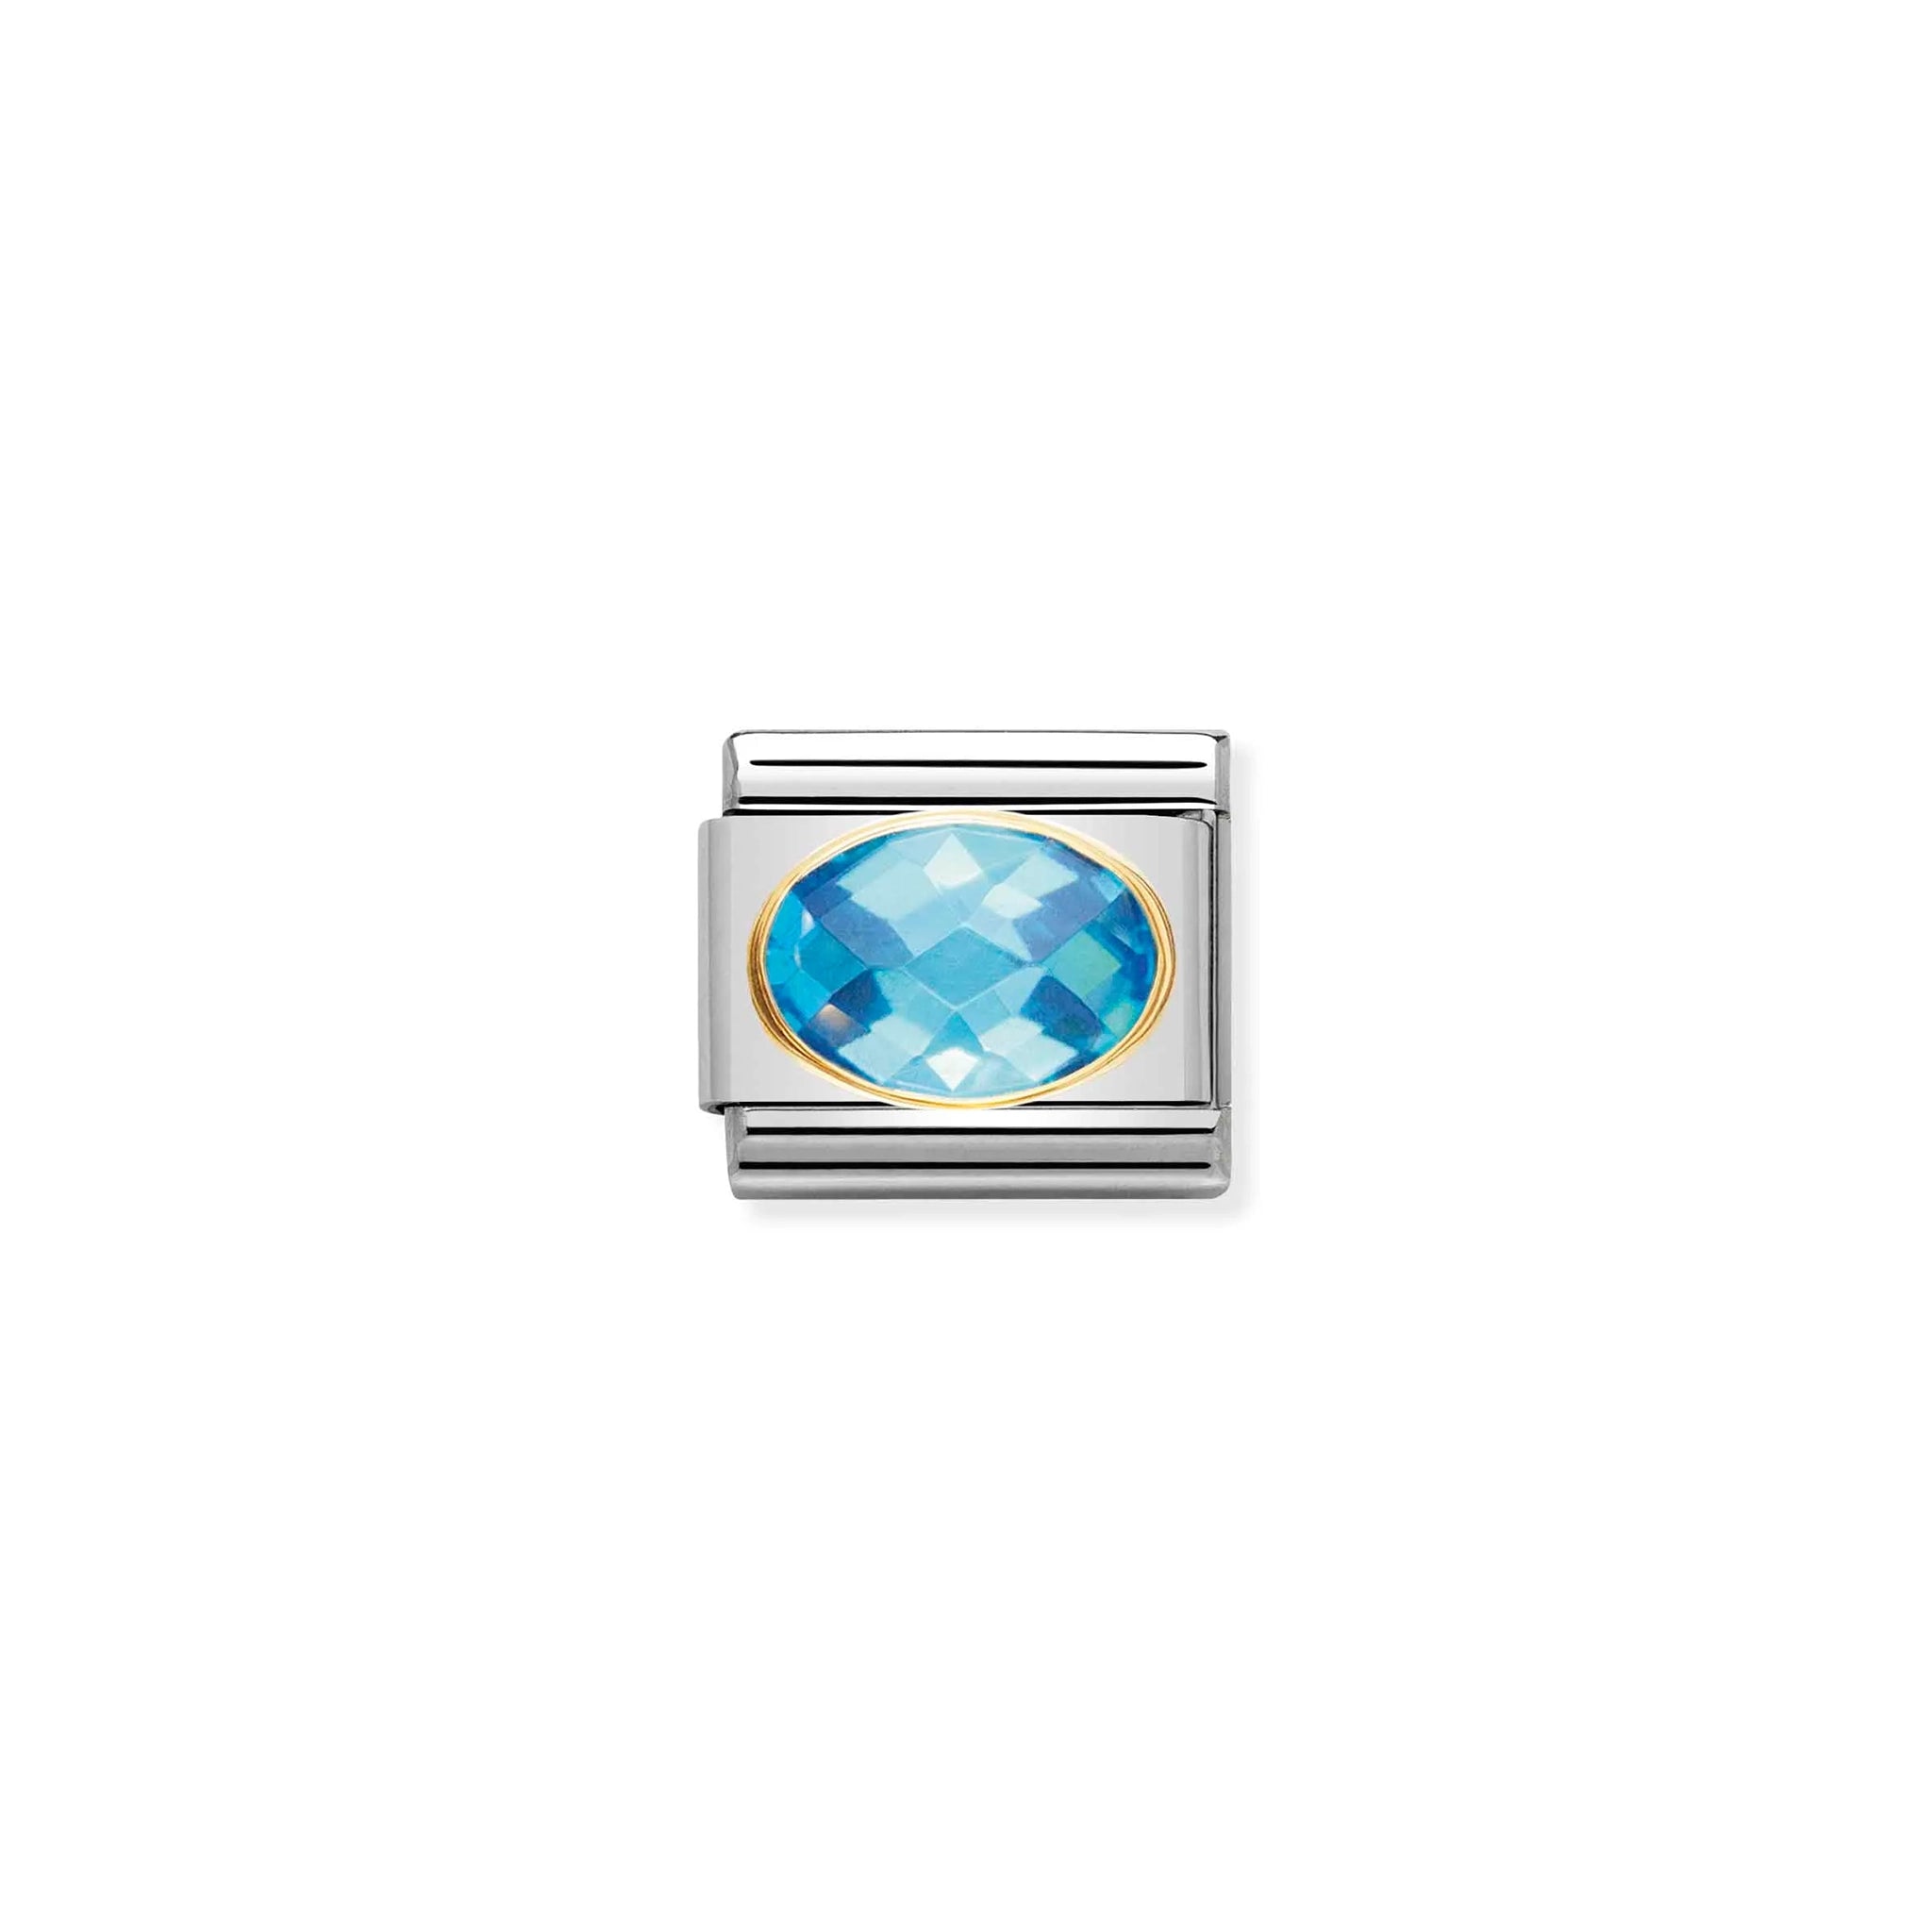 Nomination charm link featuring a faceted oval light blue cubic zirconia stone with gold surround